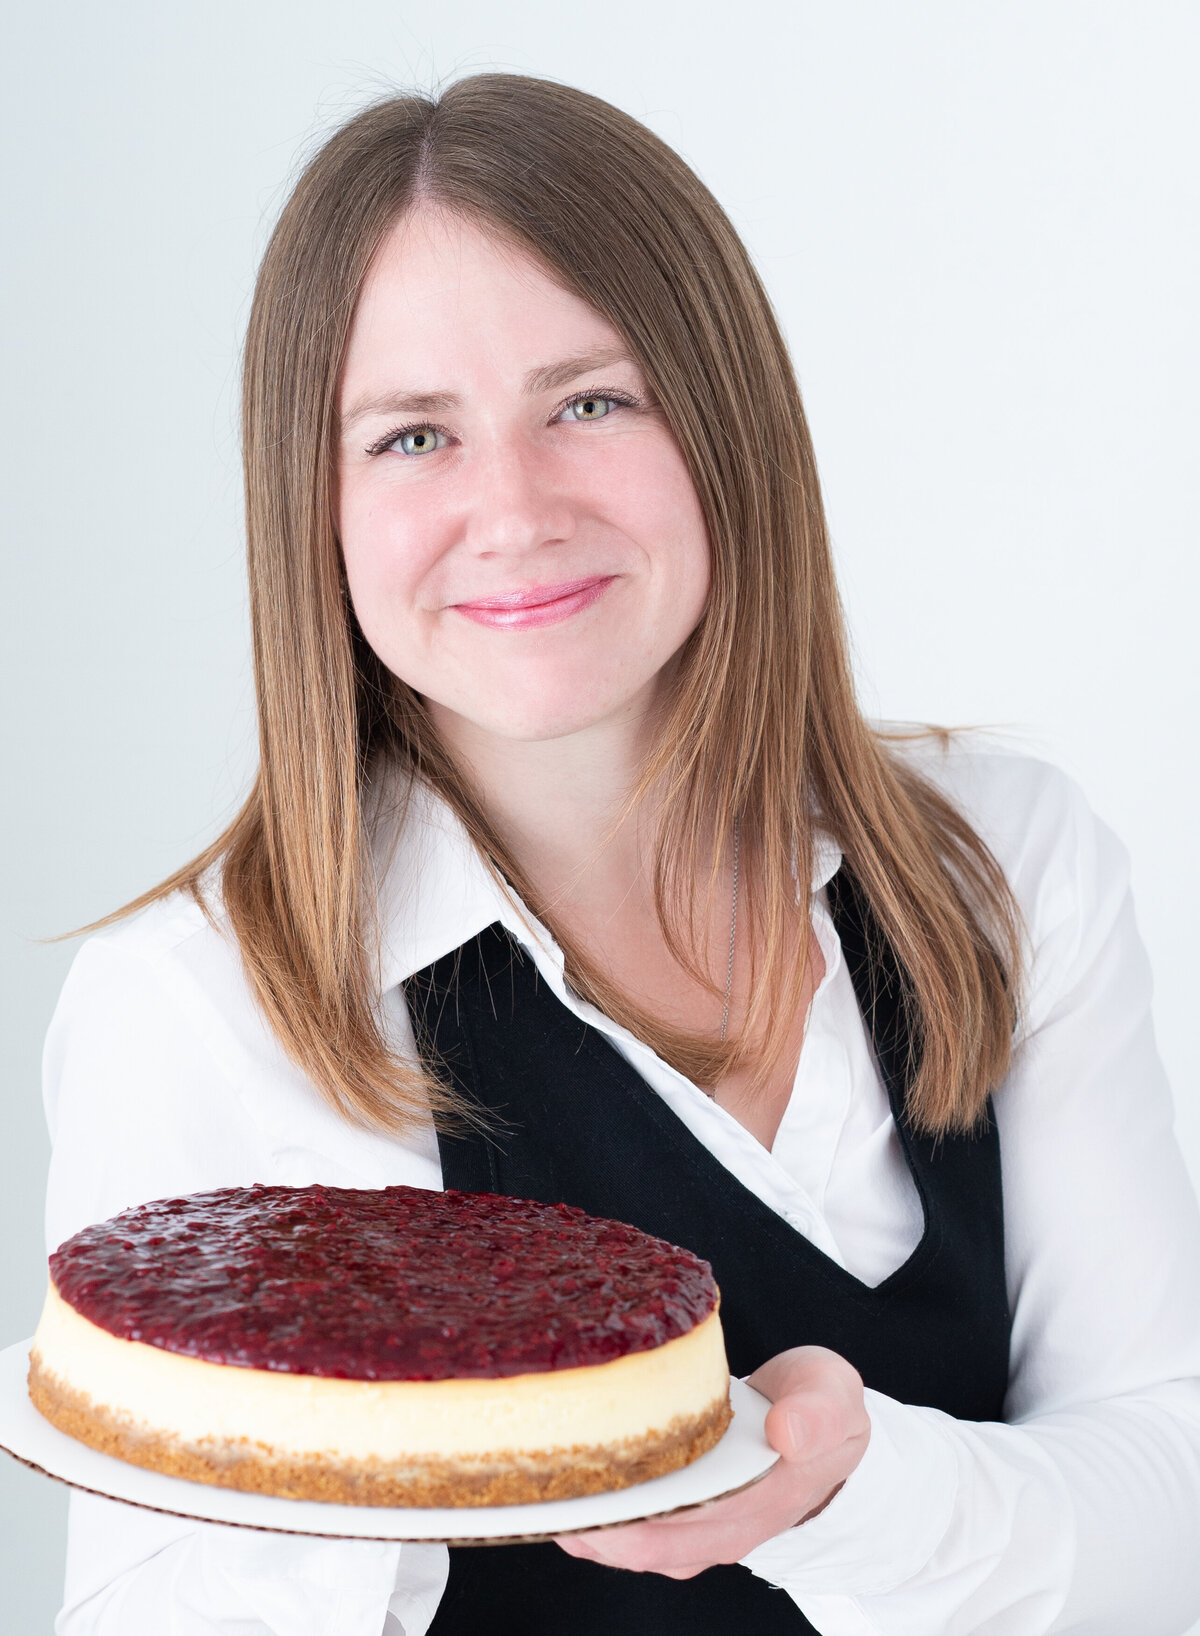 closeup image of a baker in her chef uniform holding a cheesecake